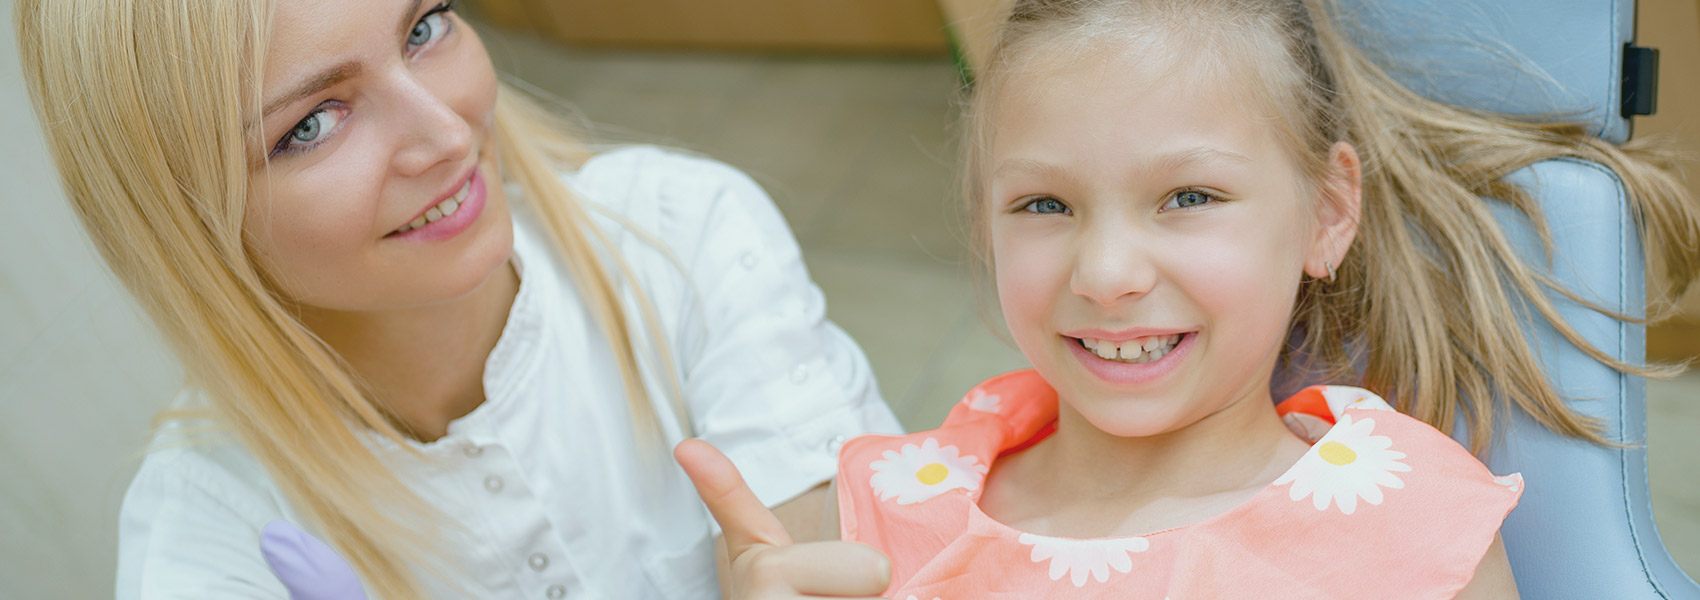 Children's Cleanings and Exams - Innovative Dental Care